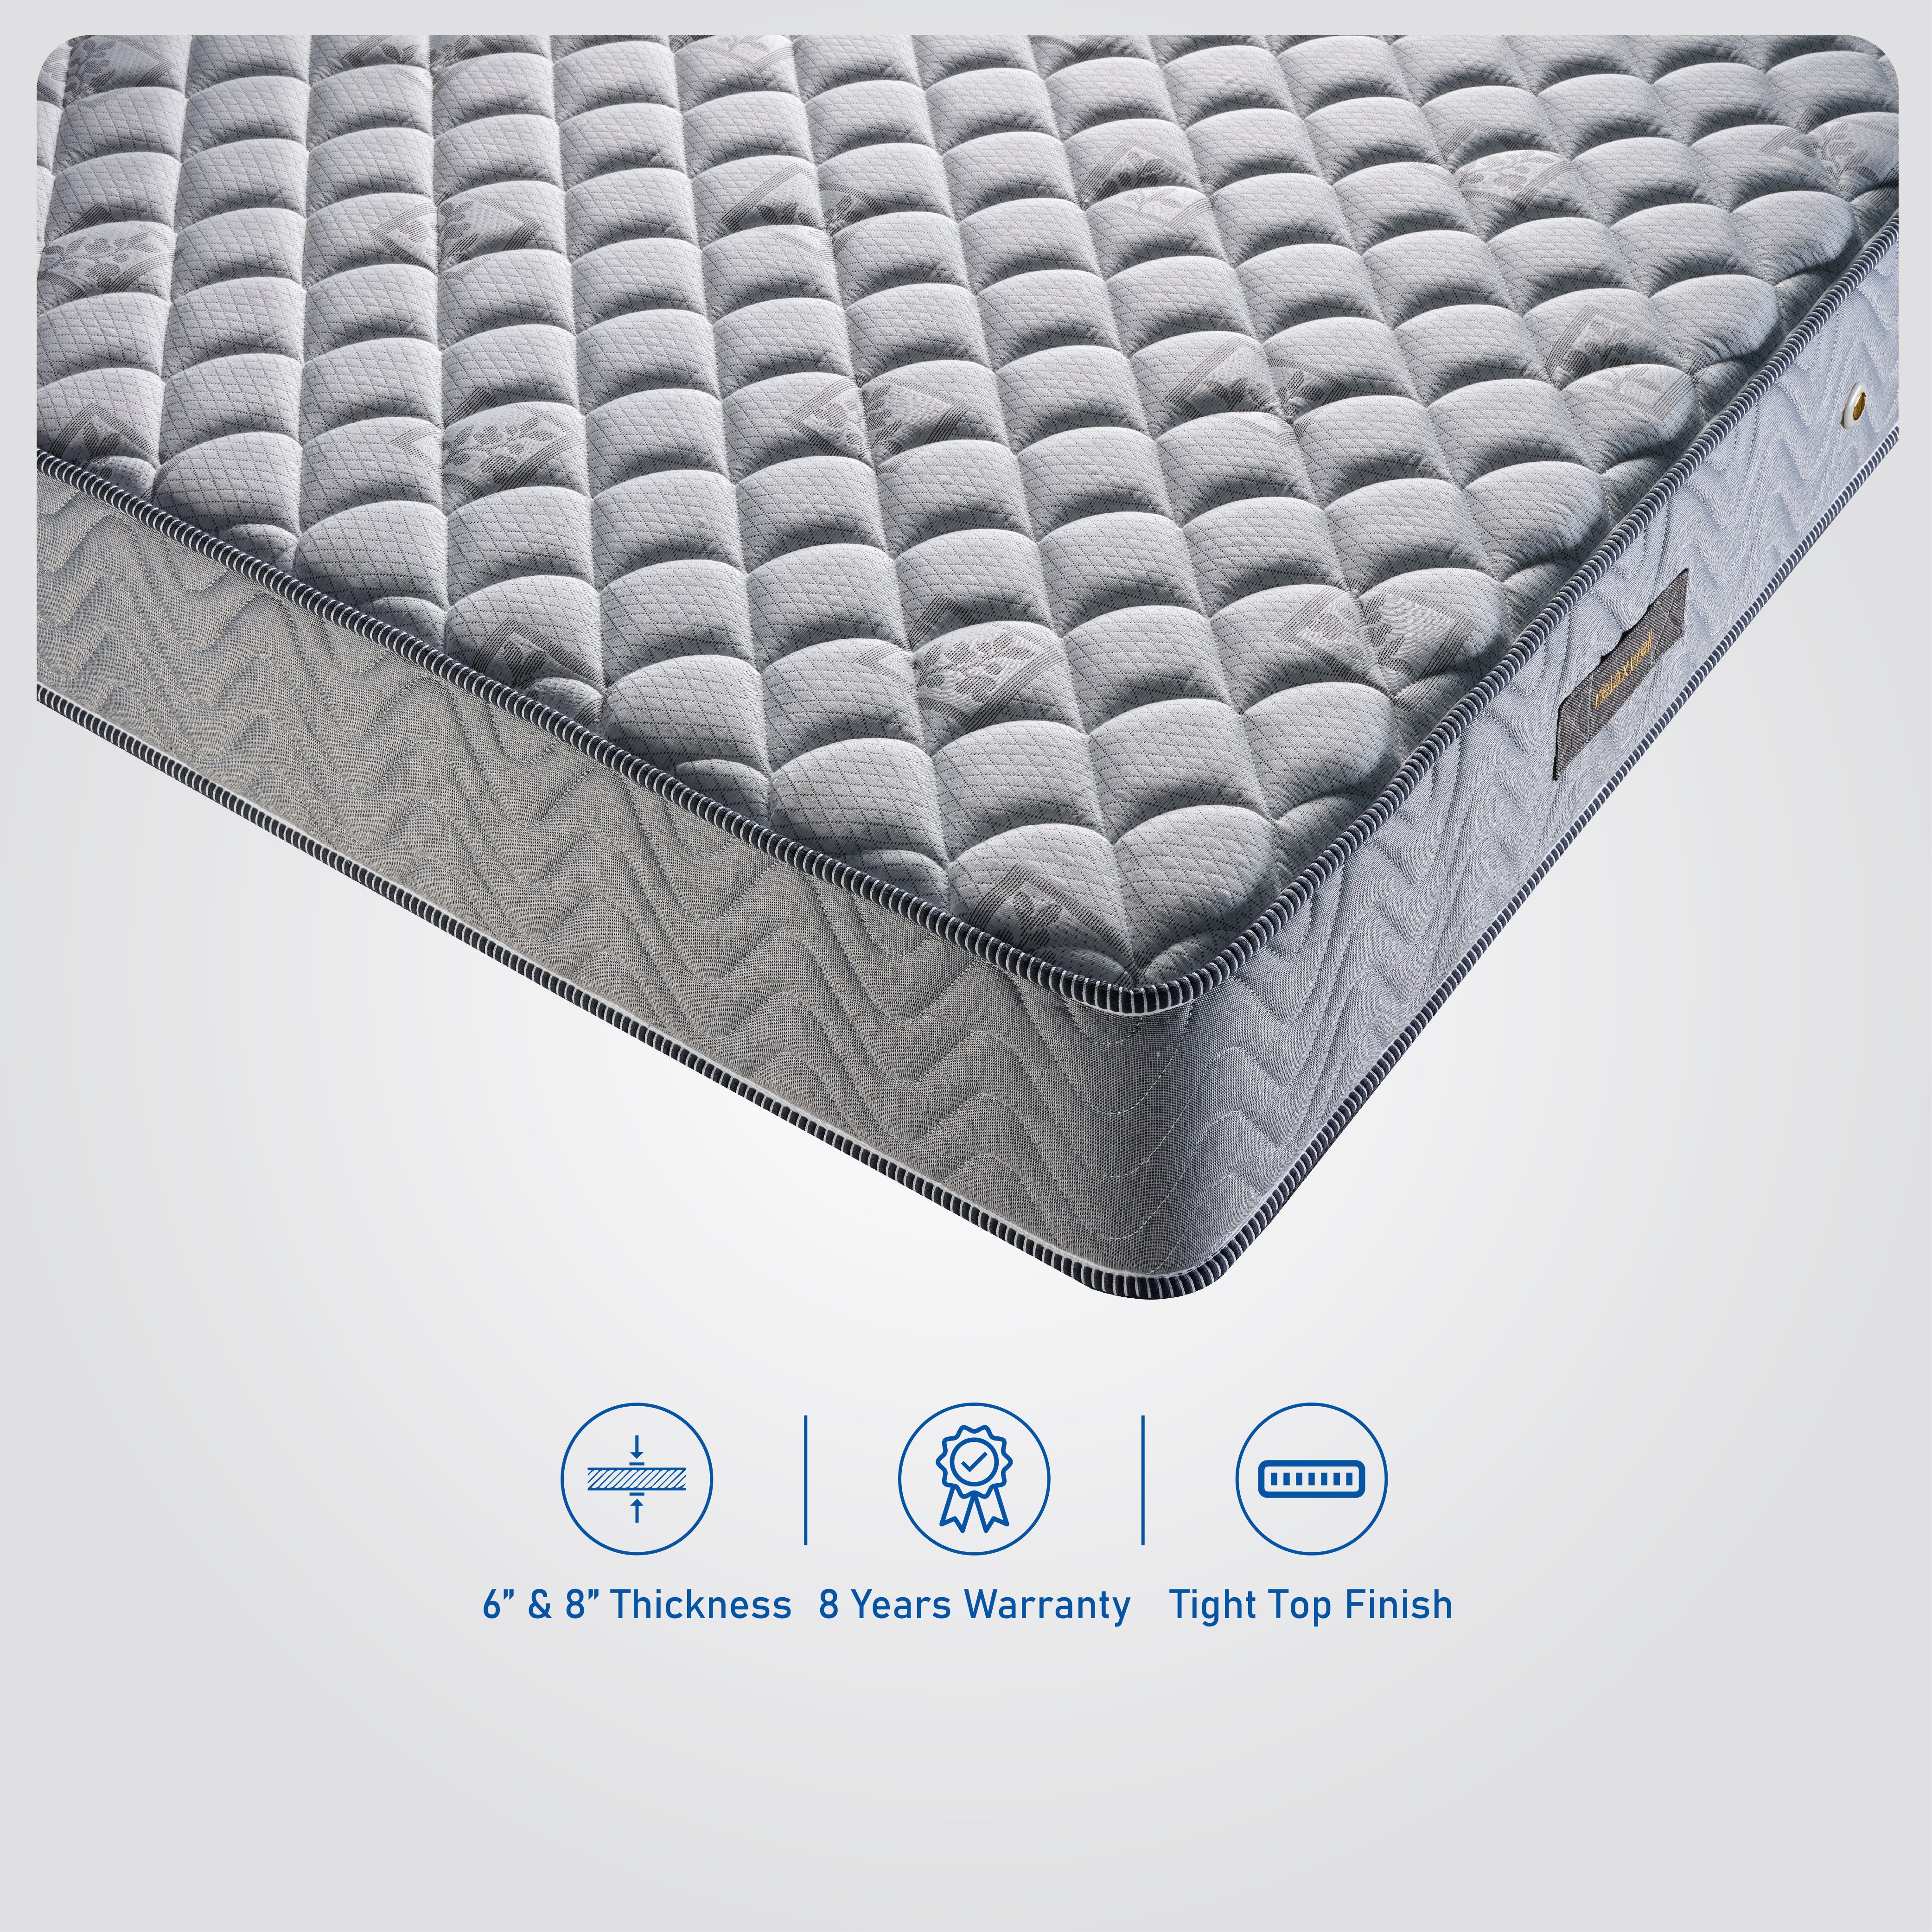 Buy Full Body Support Bonnel Spring Mattress In India